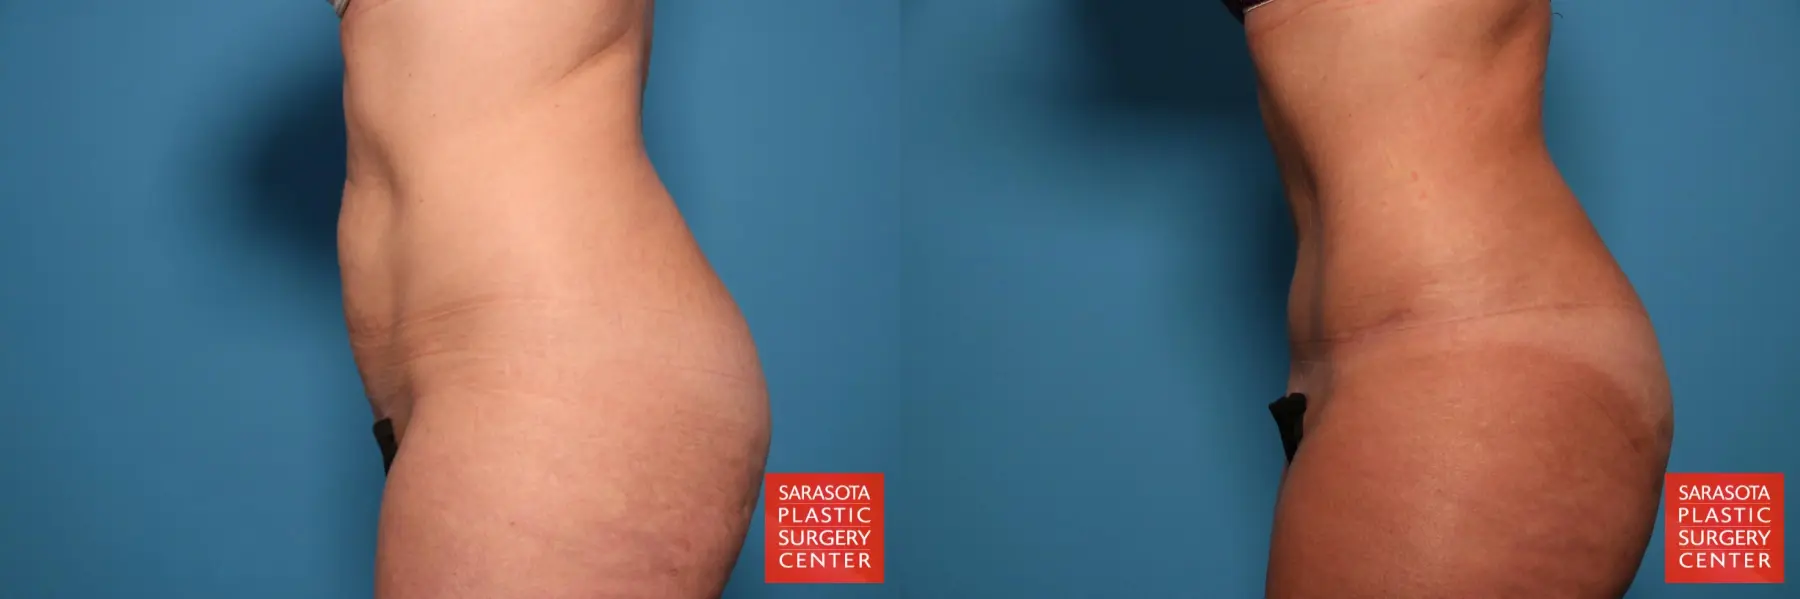 Tummy Tuck: Patient 2 - Before and After 3